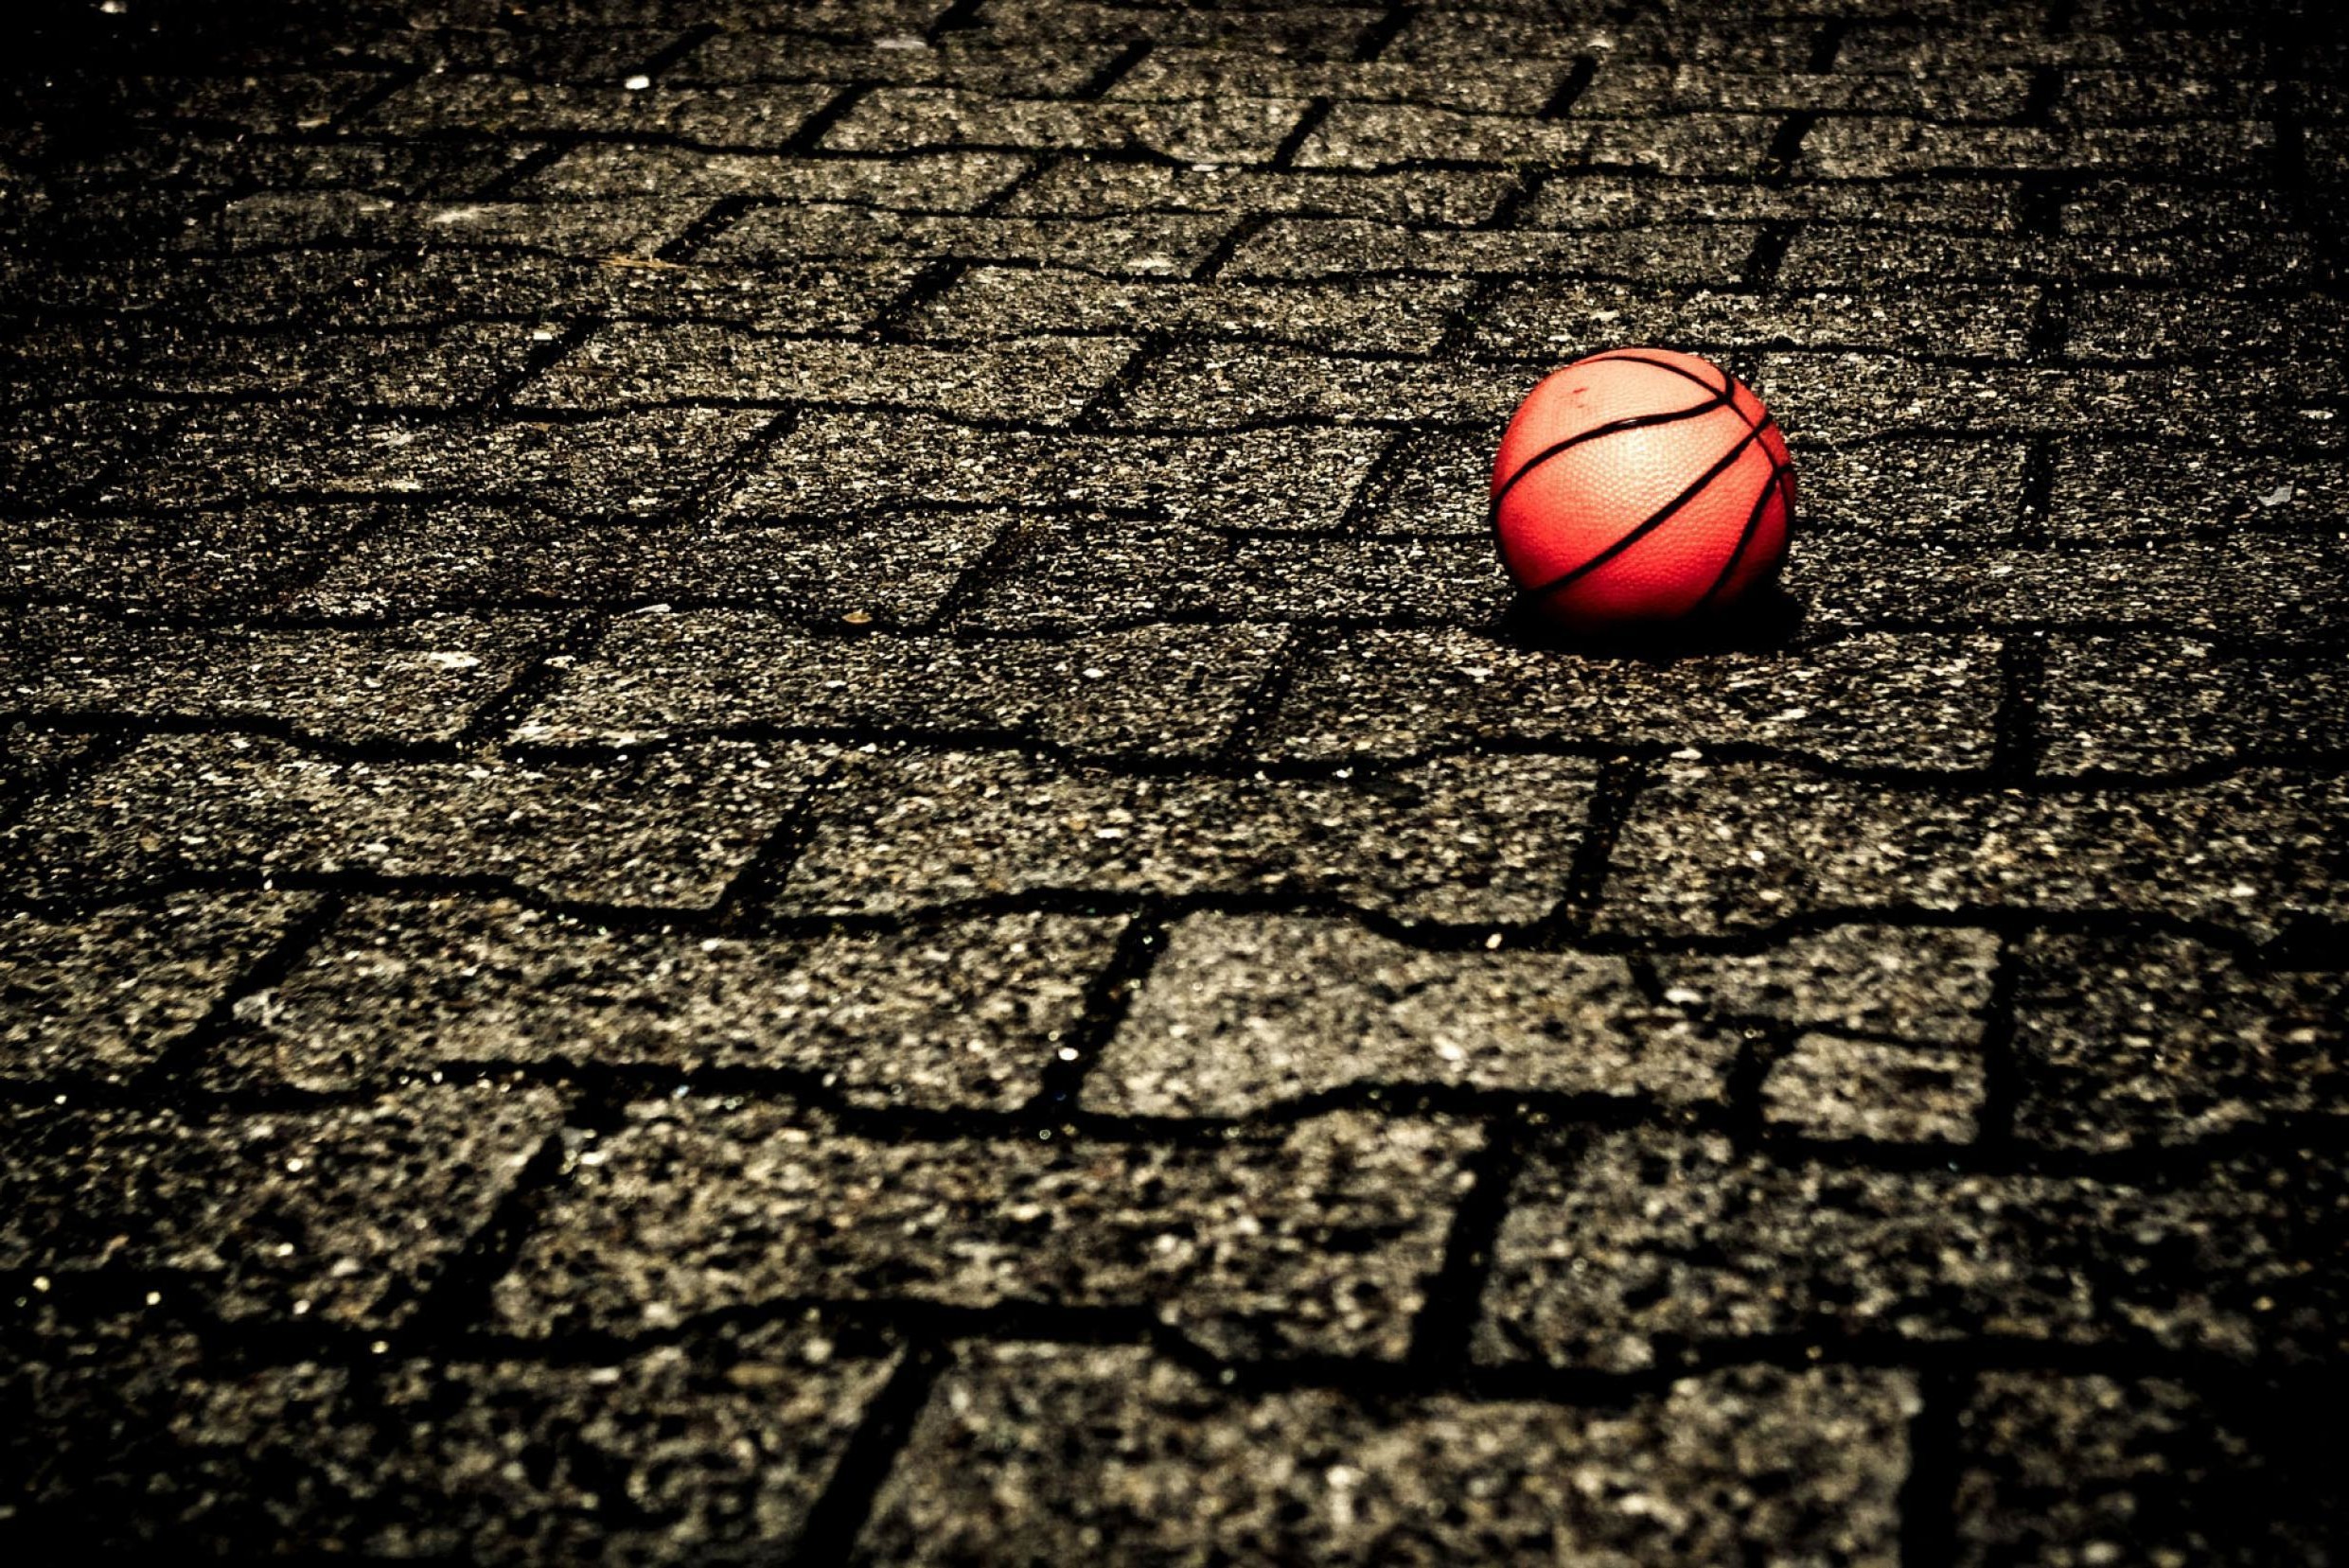 2482x1657 Cool Basketball Wallpapers | The Art Mad Wallpapers